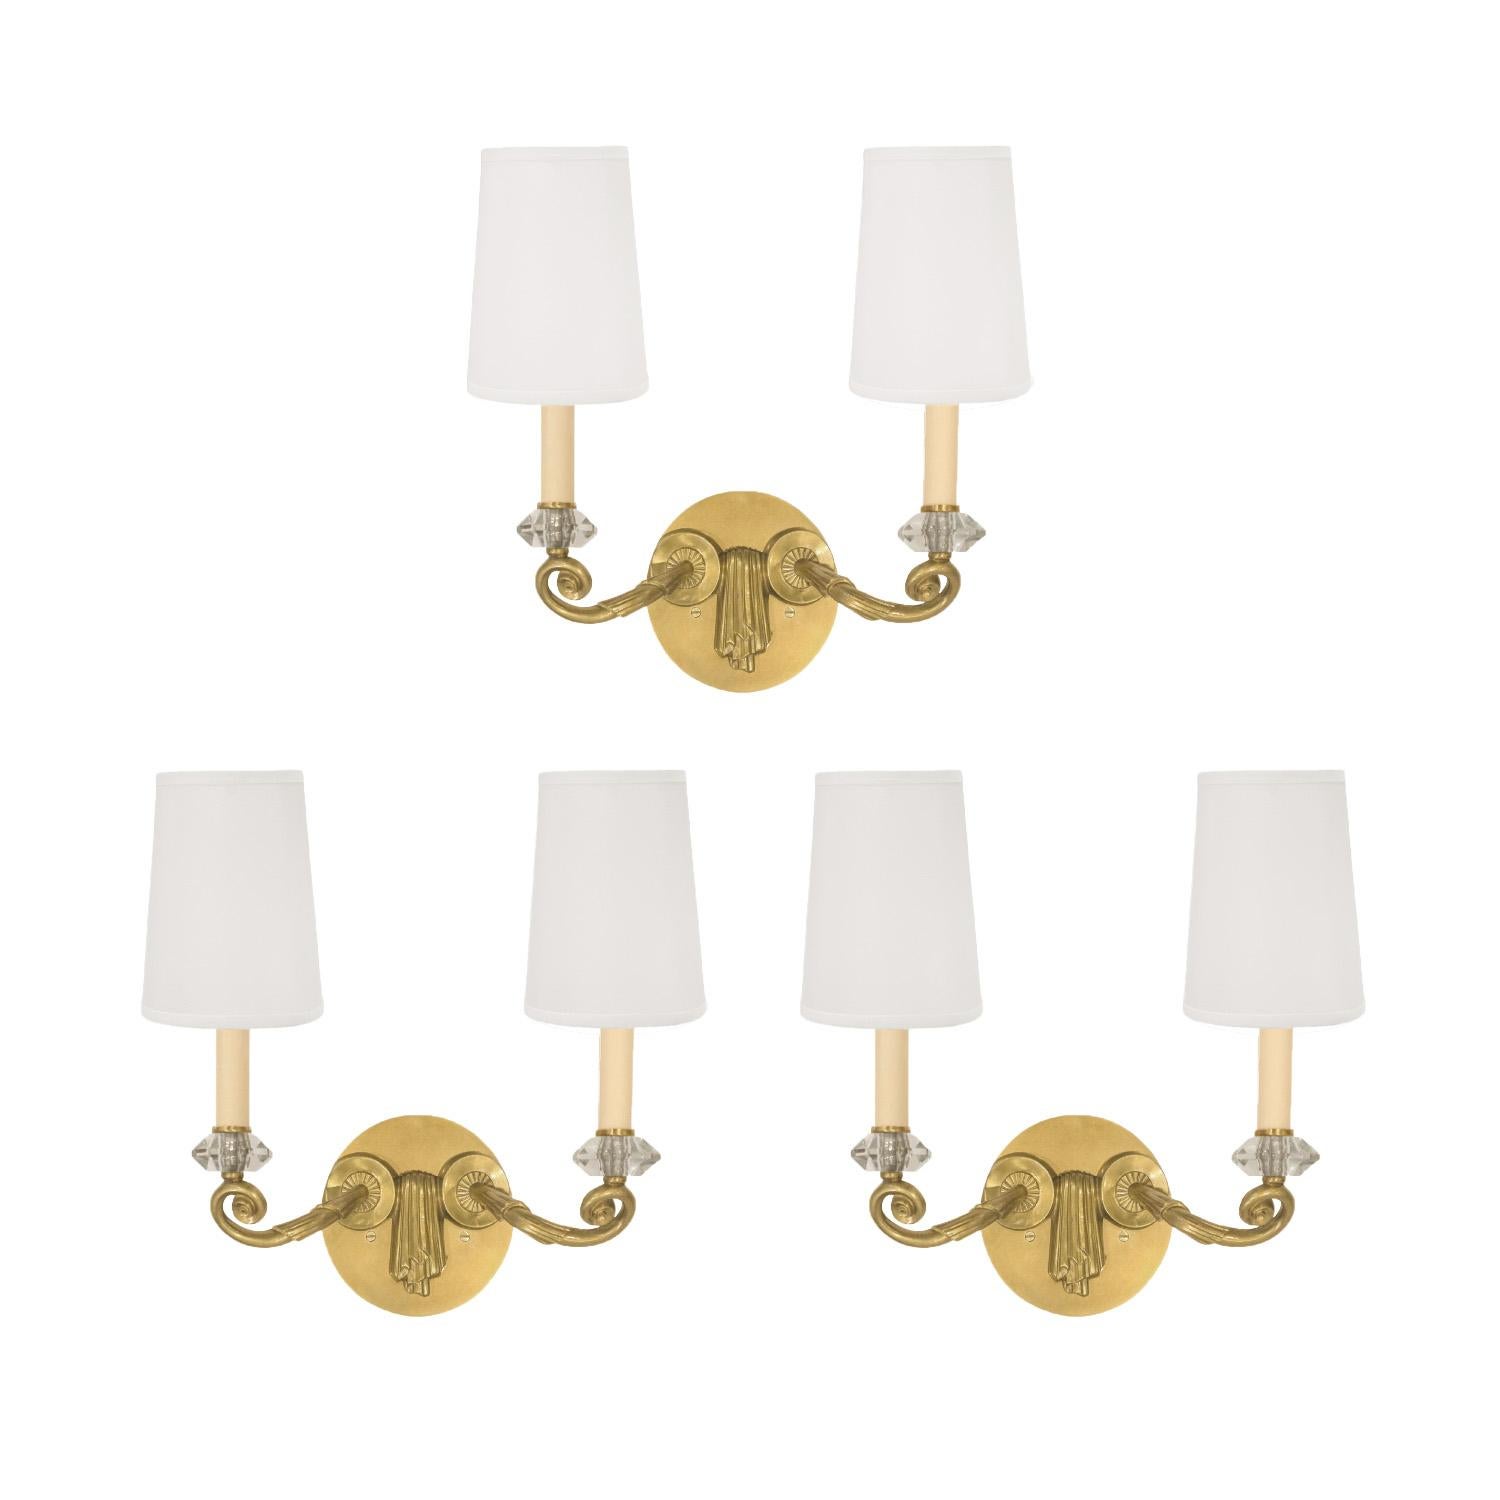 Set of three sconces model no. 3626 in bronze with faceted glass crystals by Leleu, France c.1948 (stamped “LELEU PARIS” on back). These sconces have been restored and newly rewired and take standard candelabra bulbs. These iconic sconces are the